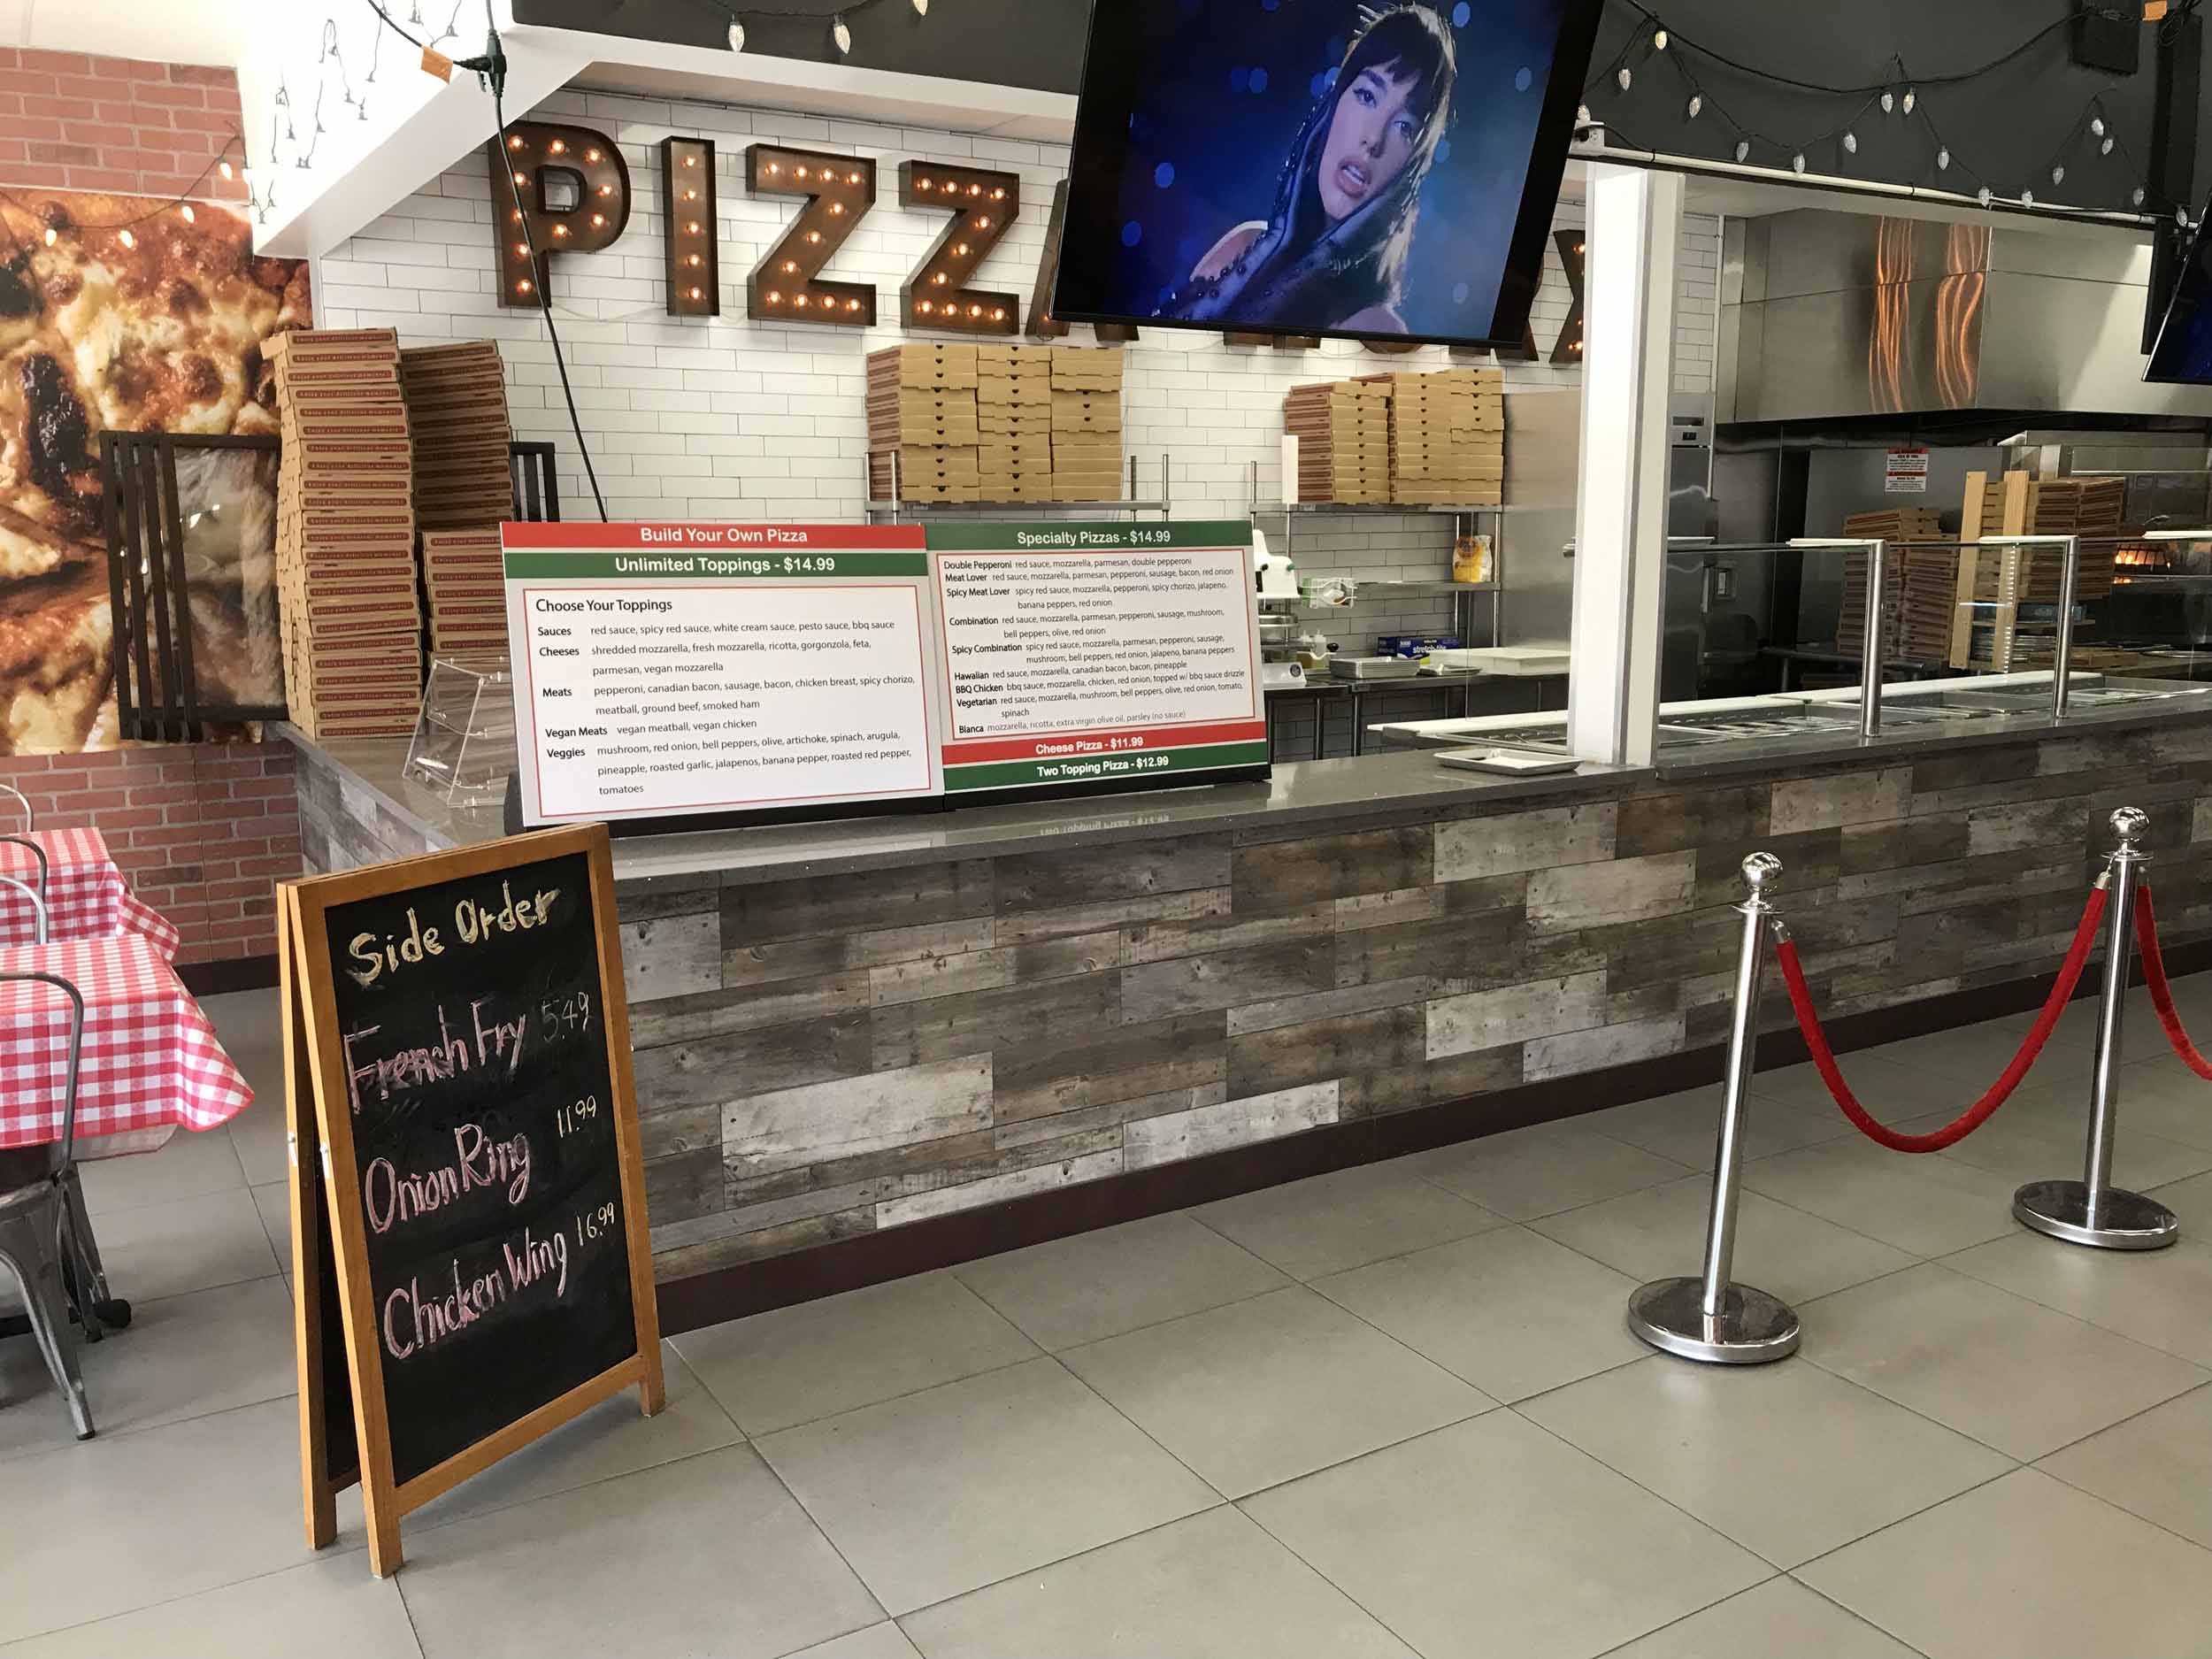 Pizza Worx Offers Casual Italian Dining in The Outpost Building